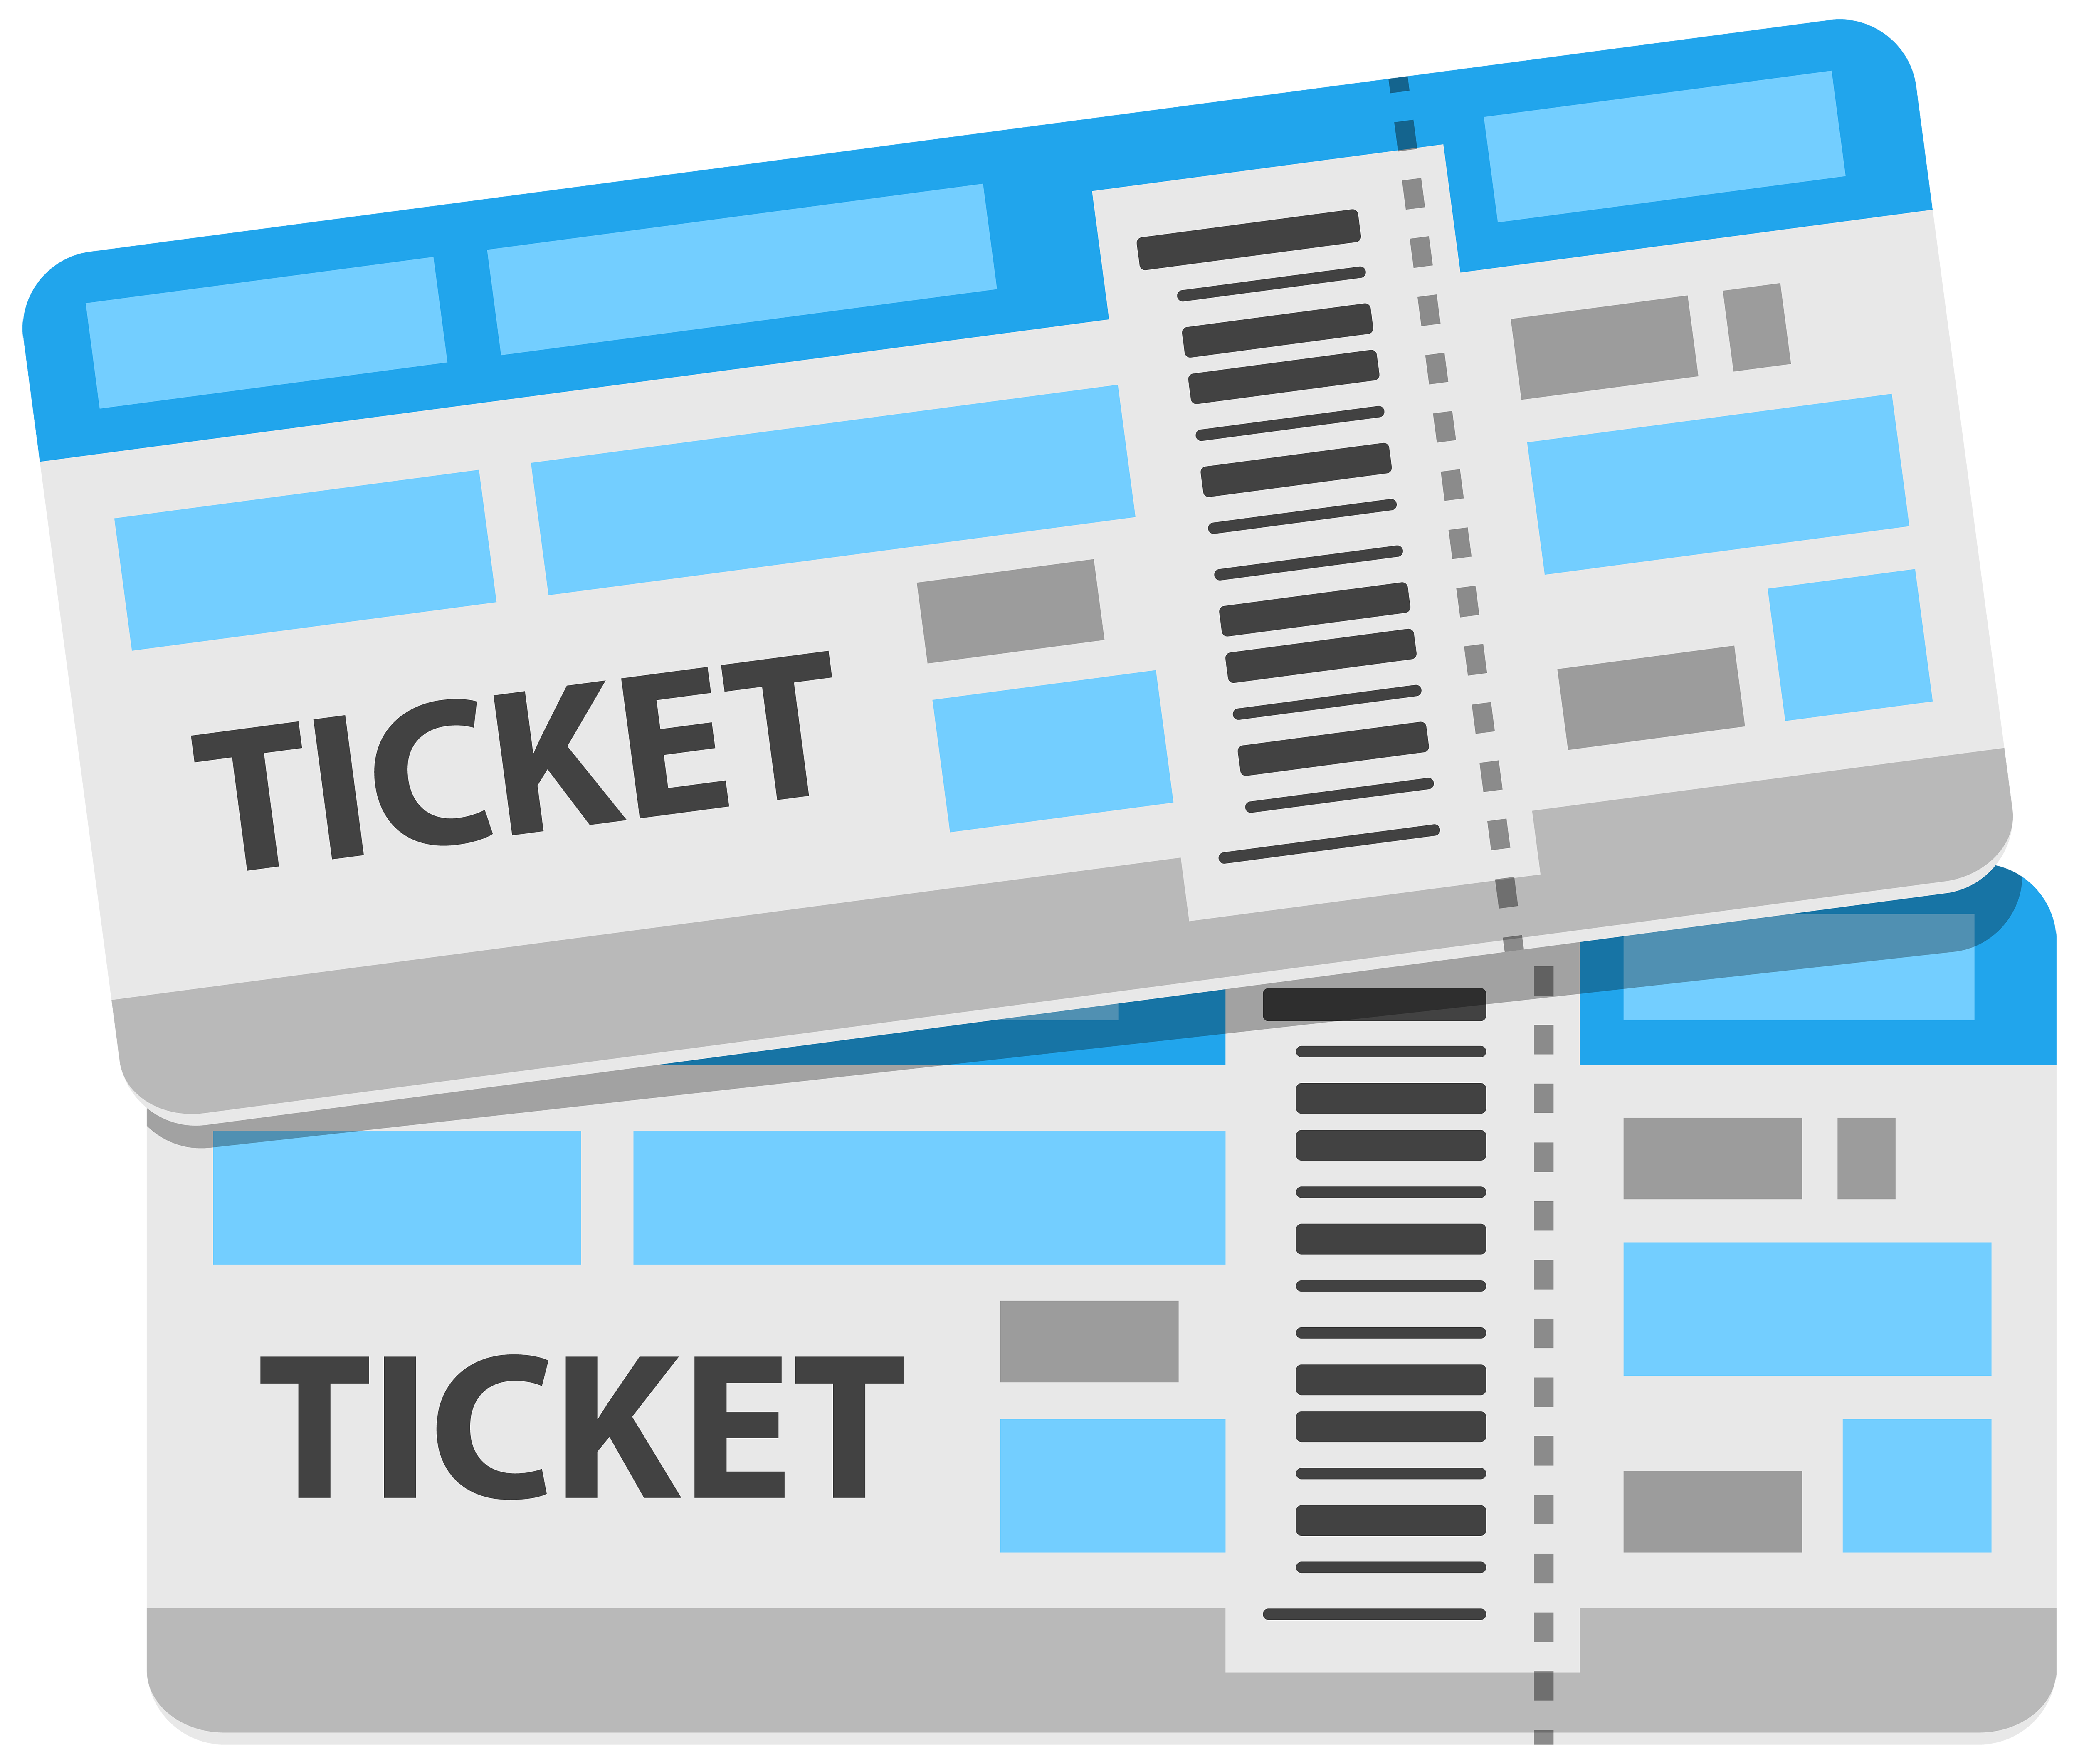 Ticket clipart blue Ticket blue Transparent FREE for download on